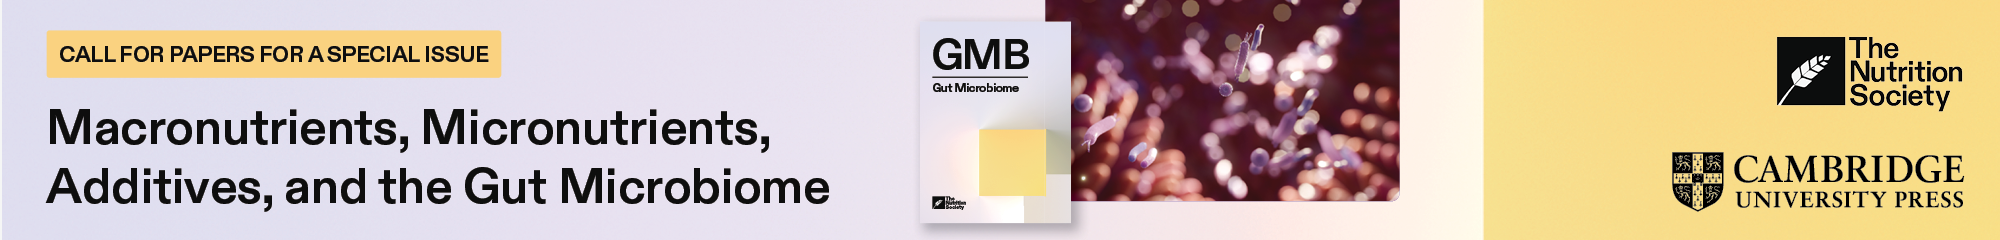 Gut Microbiome Call for Papers for a Special Issue